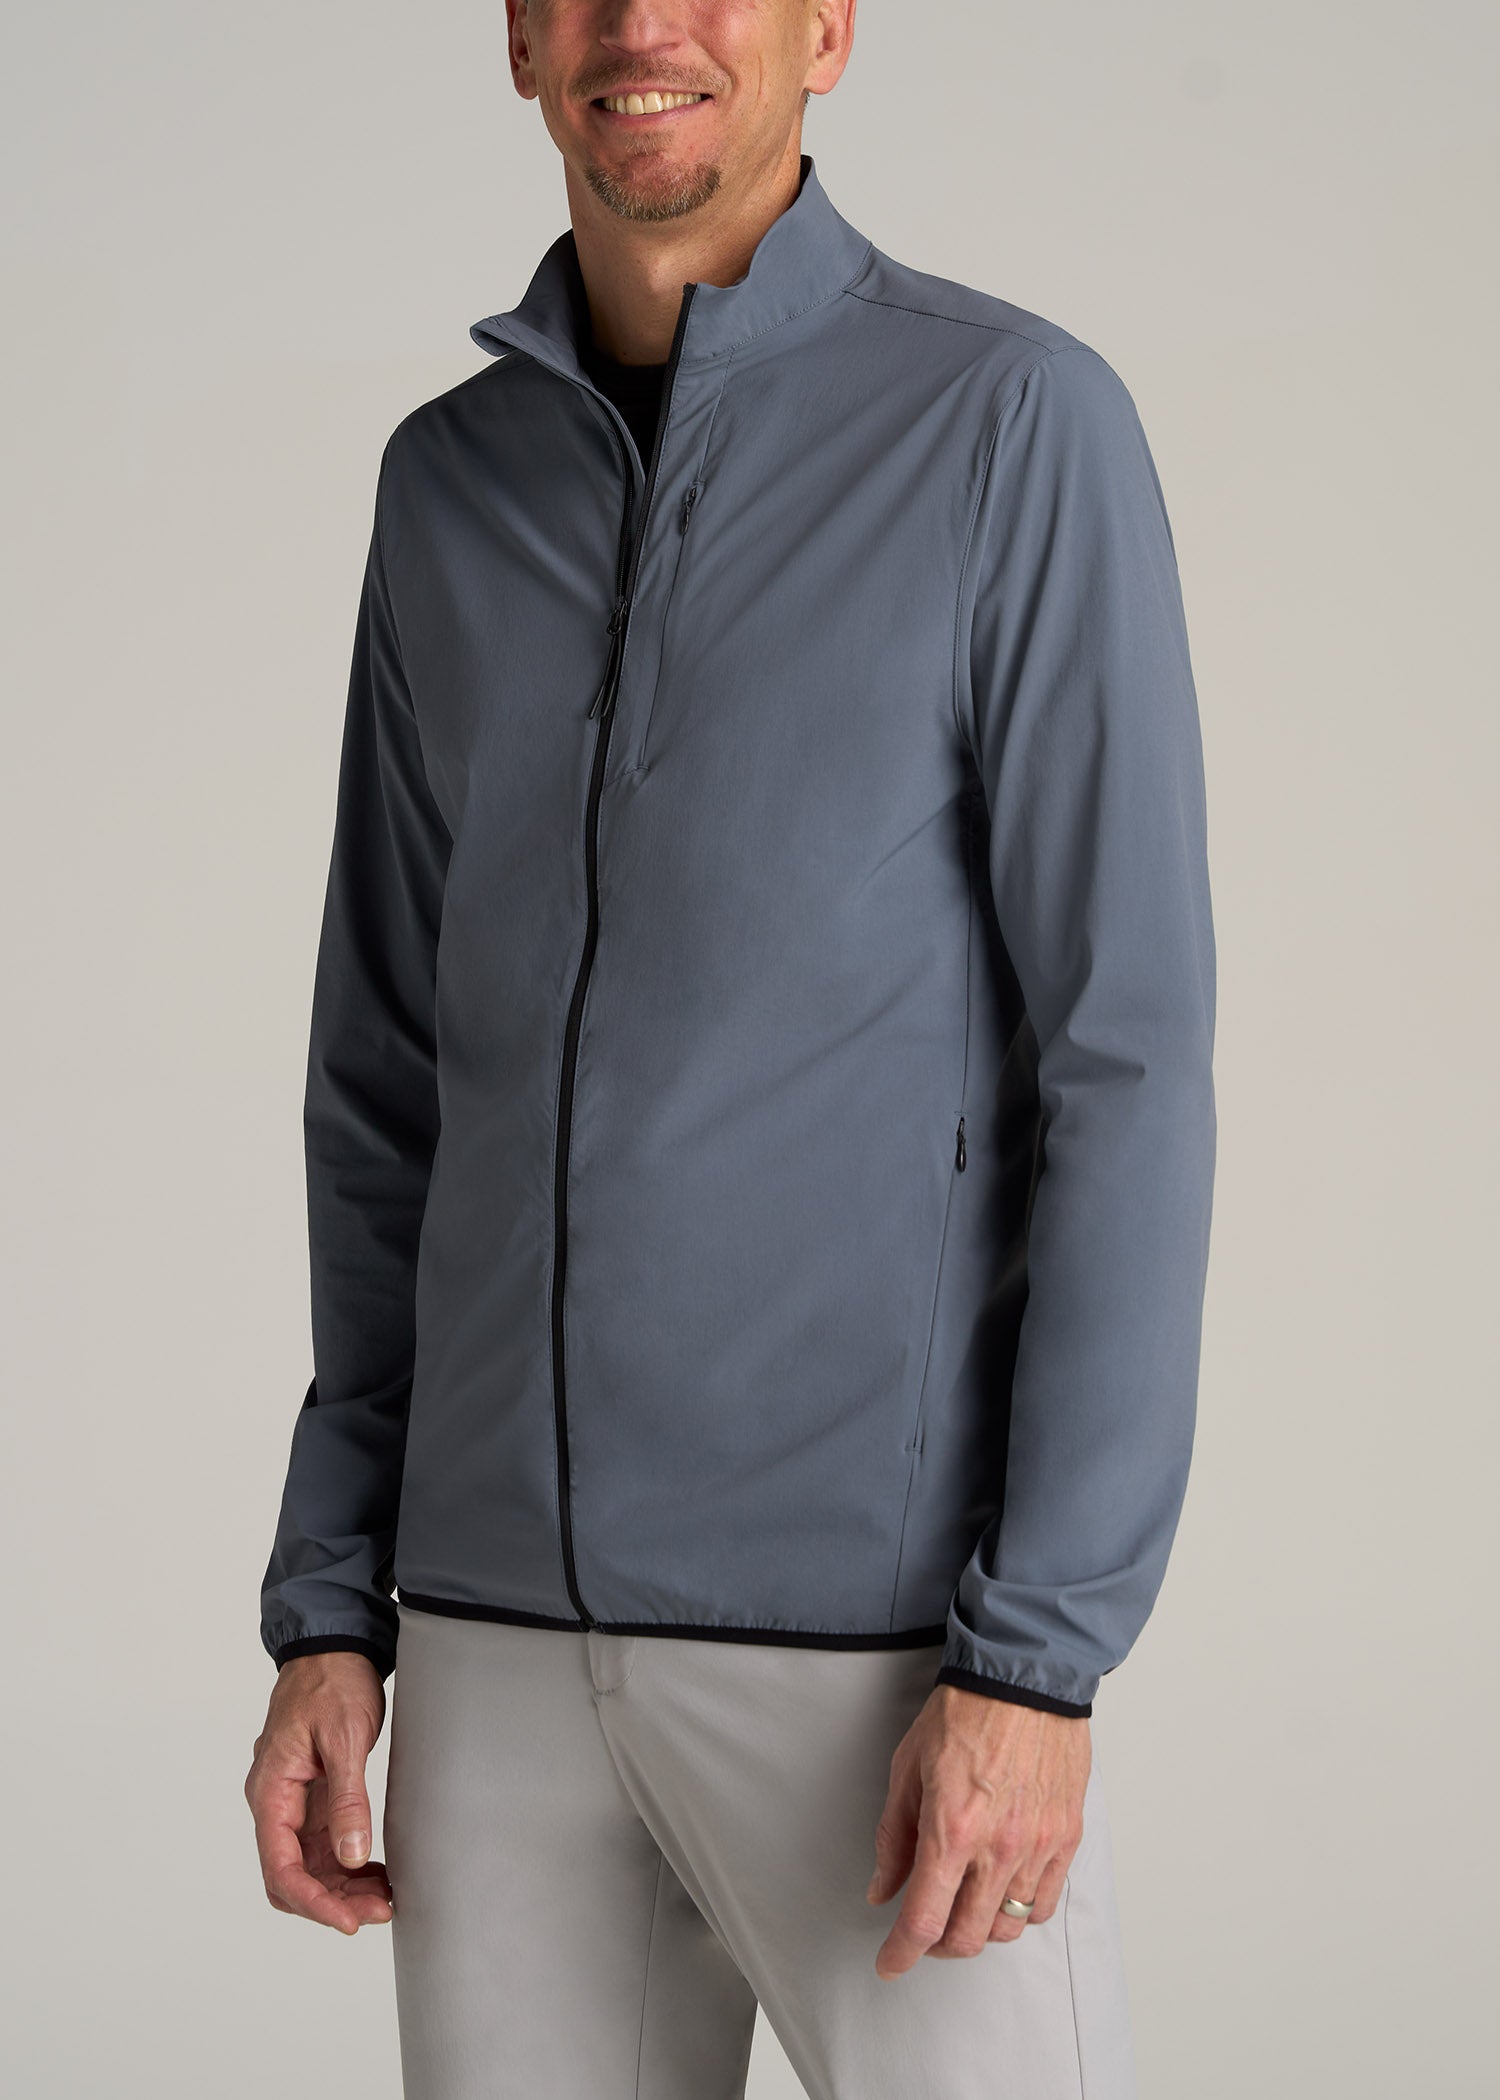 Tall Men's Softshell Jacket for Outdoor Training in Smoky Blue